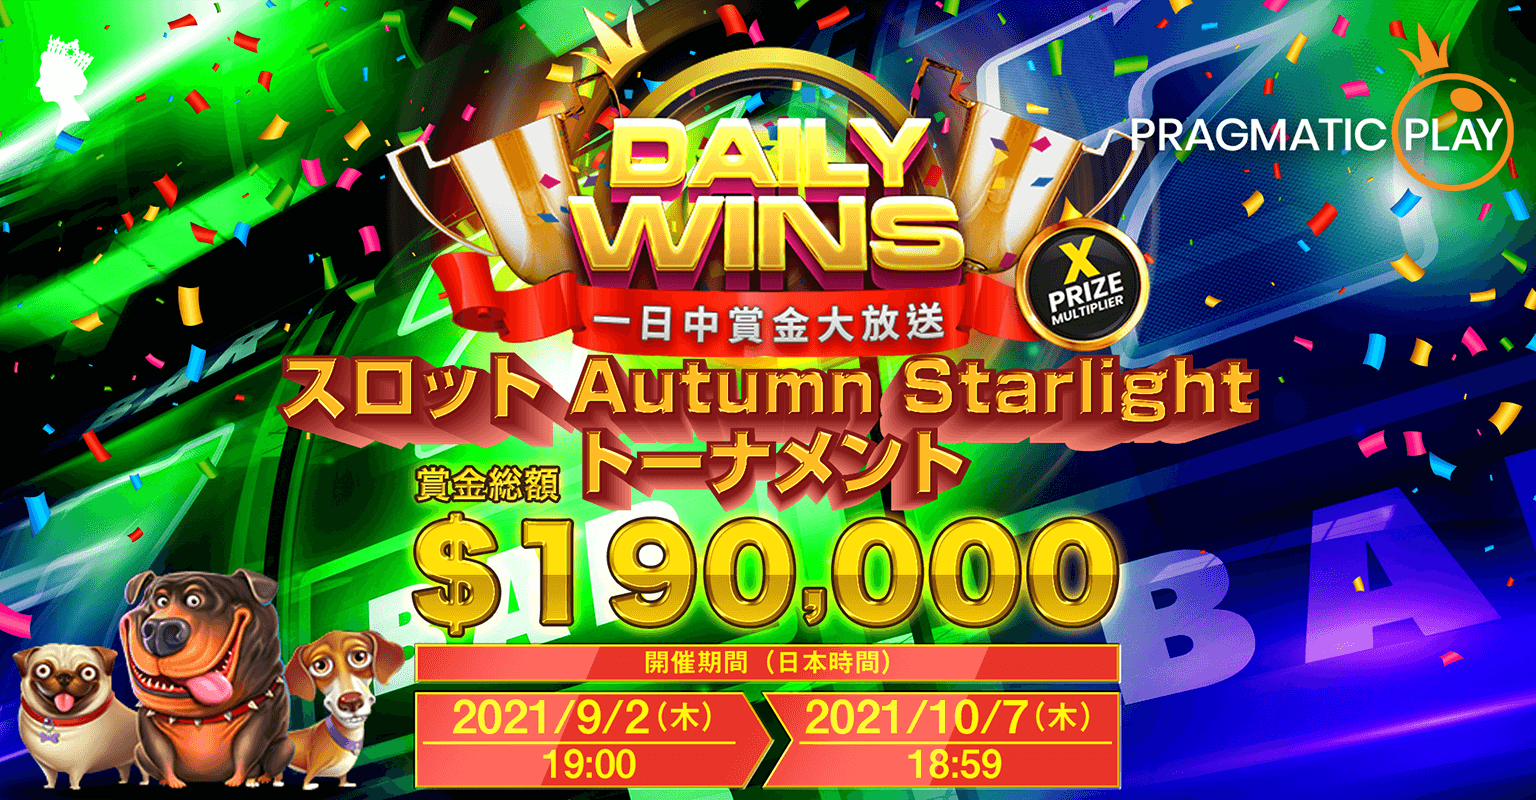 Participate in the Autumn Starlight Online Slot Tournament that will be held for five weeks! Win up to 1000x of your bet with daily cashout multipliers.